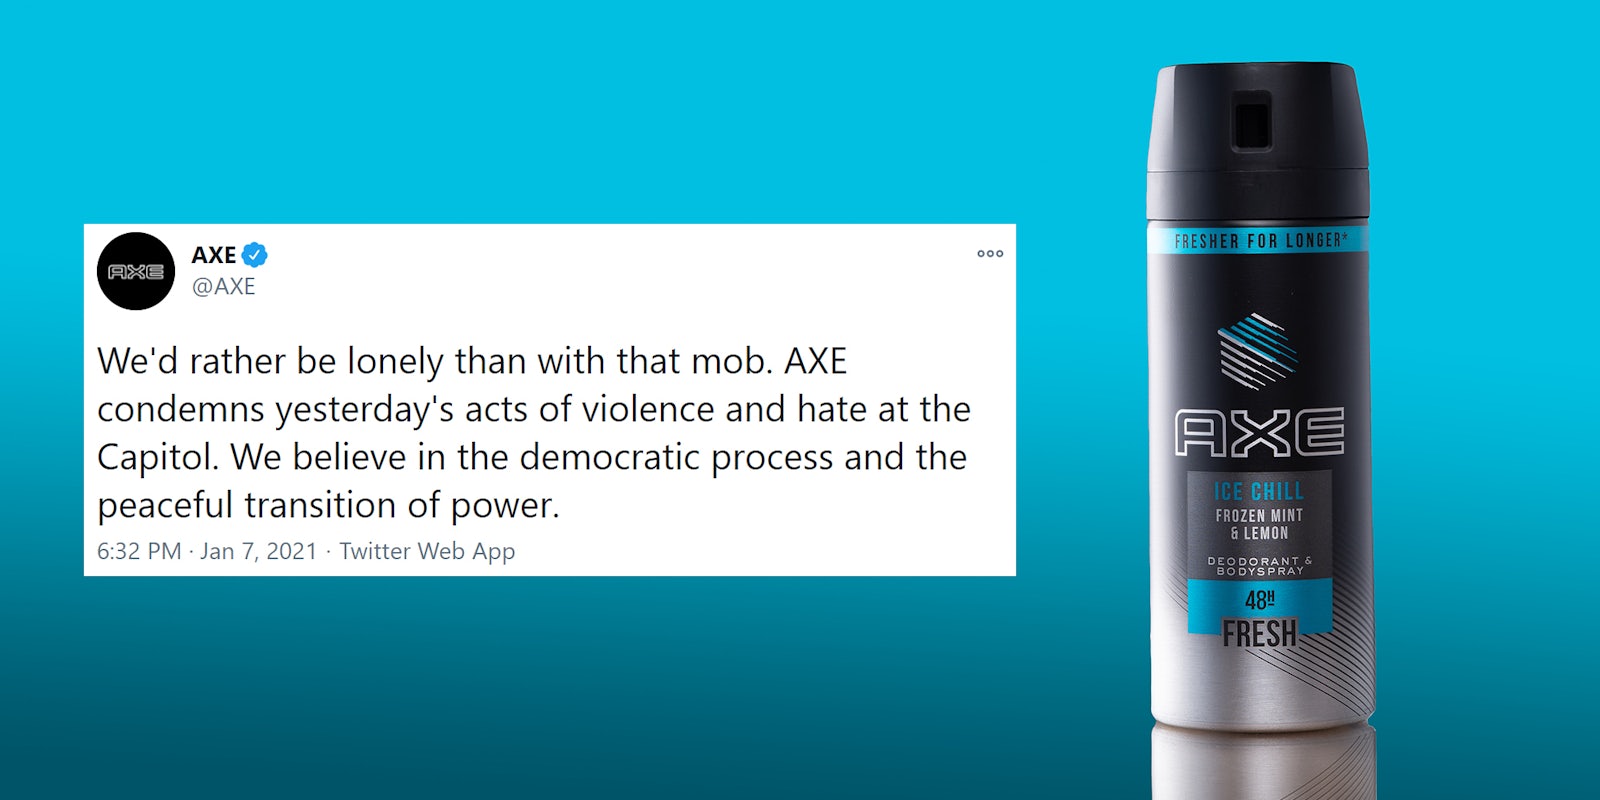 Axe tweet 'We'd rather be lonely than with that mob. AXE condemns yesterday's acts of violence and hate at the Capitol. We believe in the democratic process and the peaceful transition ofpower.' next to Axe body spray can